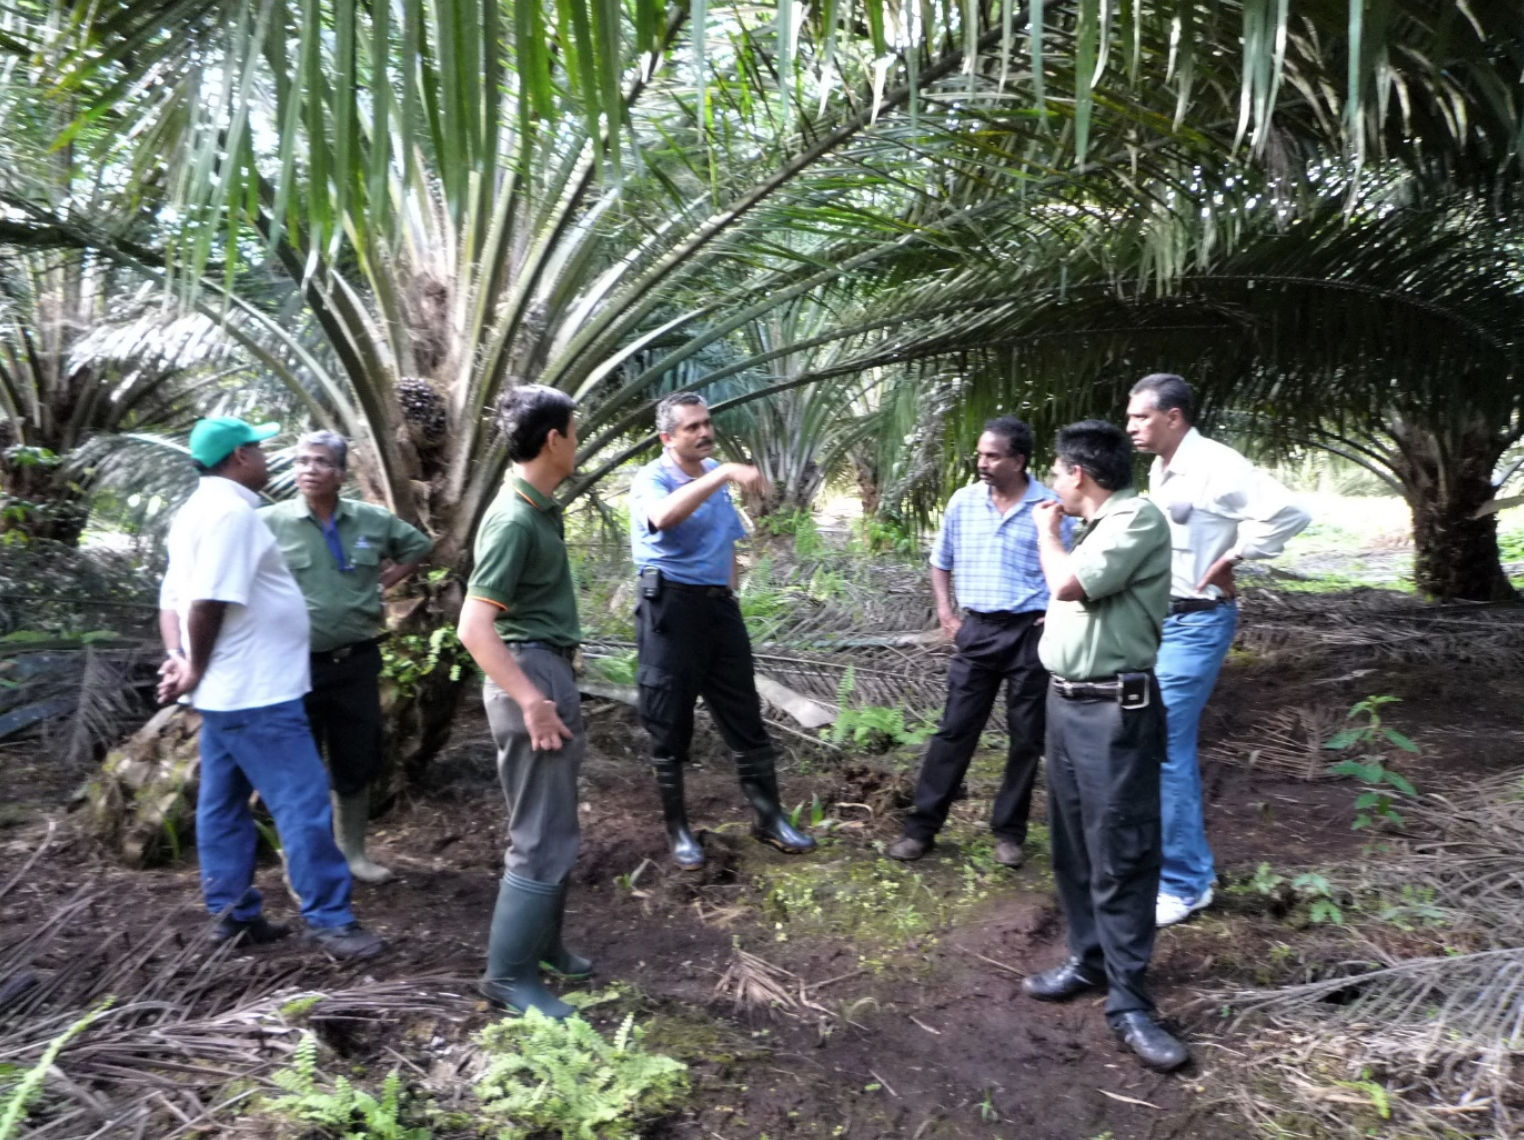   Peat Soil Management Advisory  – Discussion on issues related to oil palm cultivation on peat soil. 